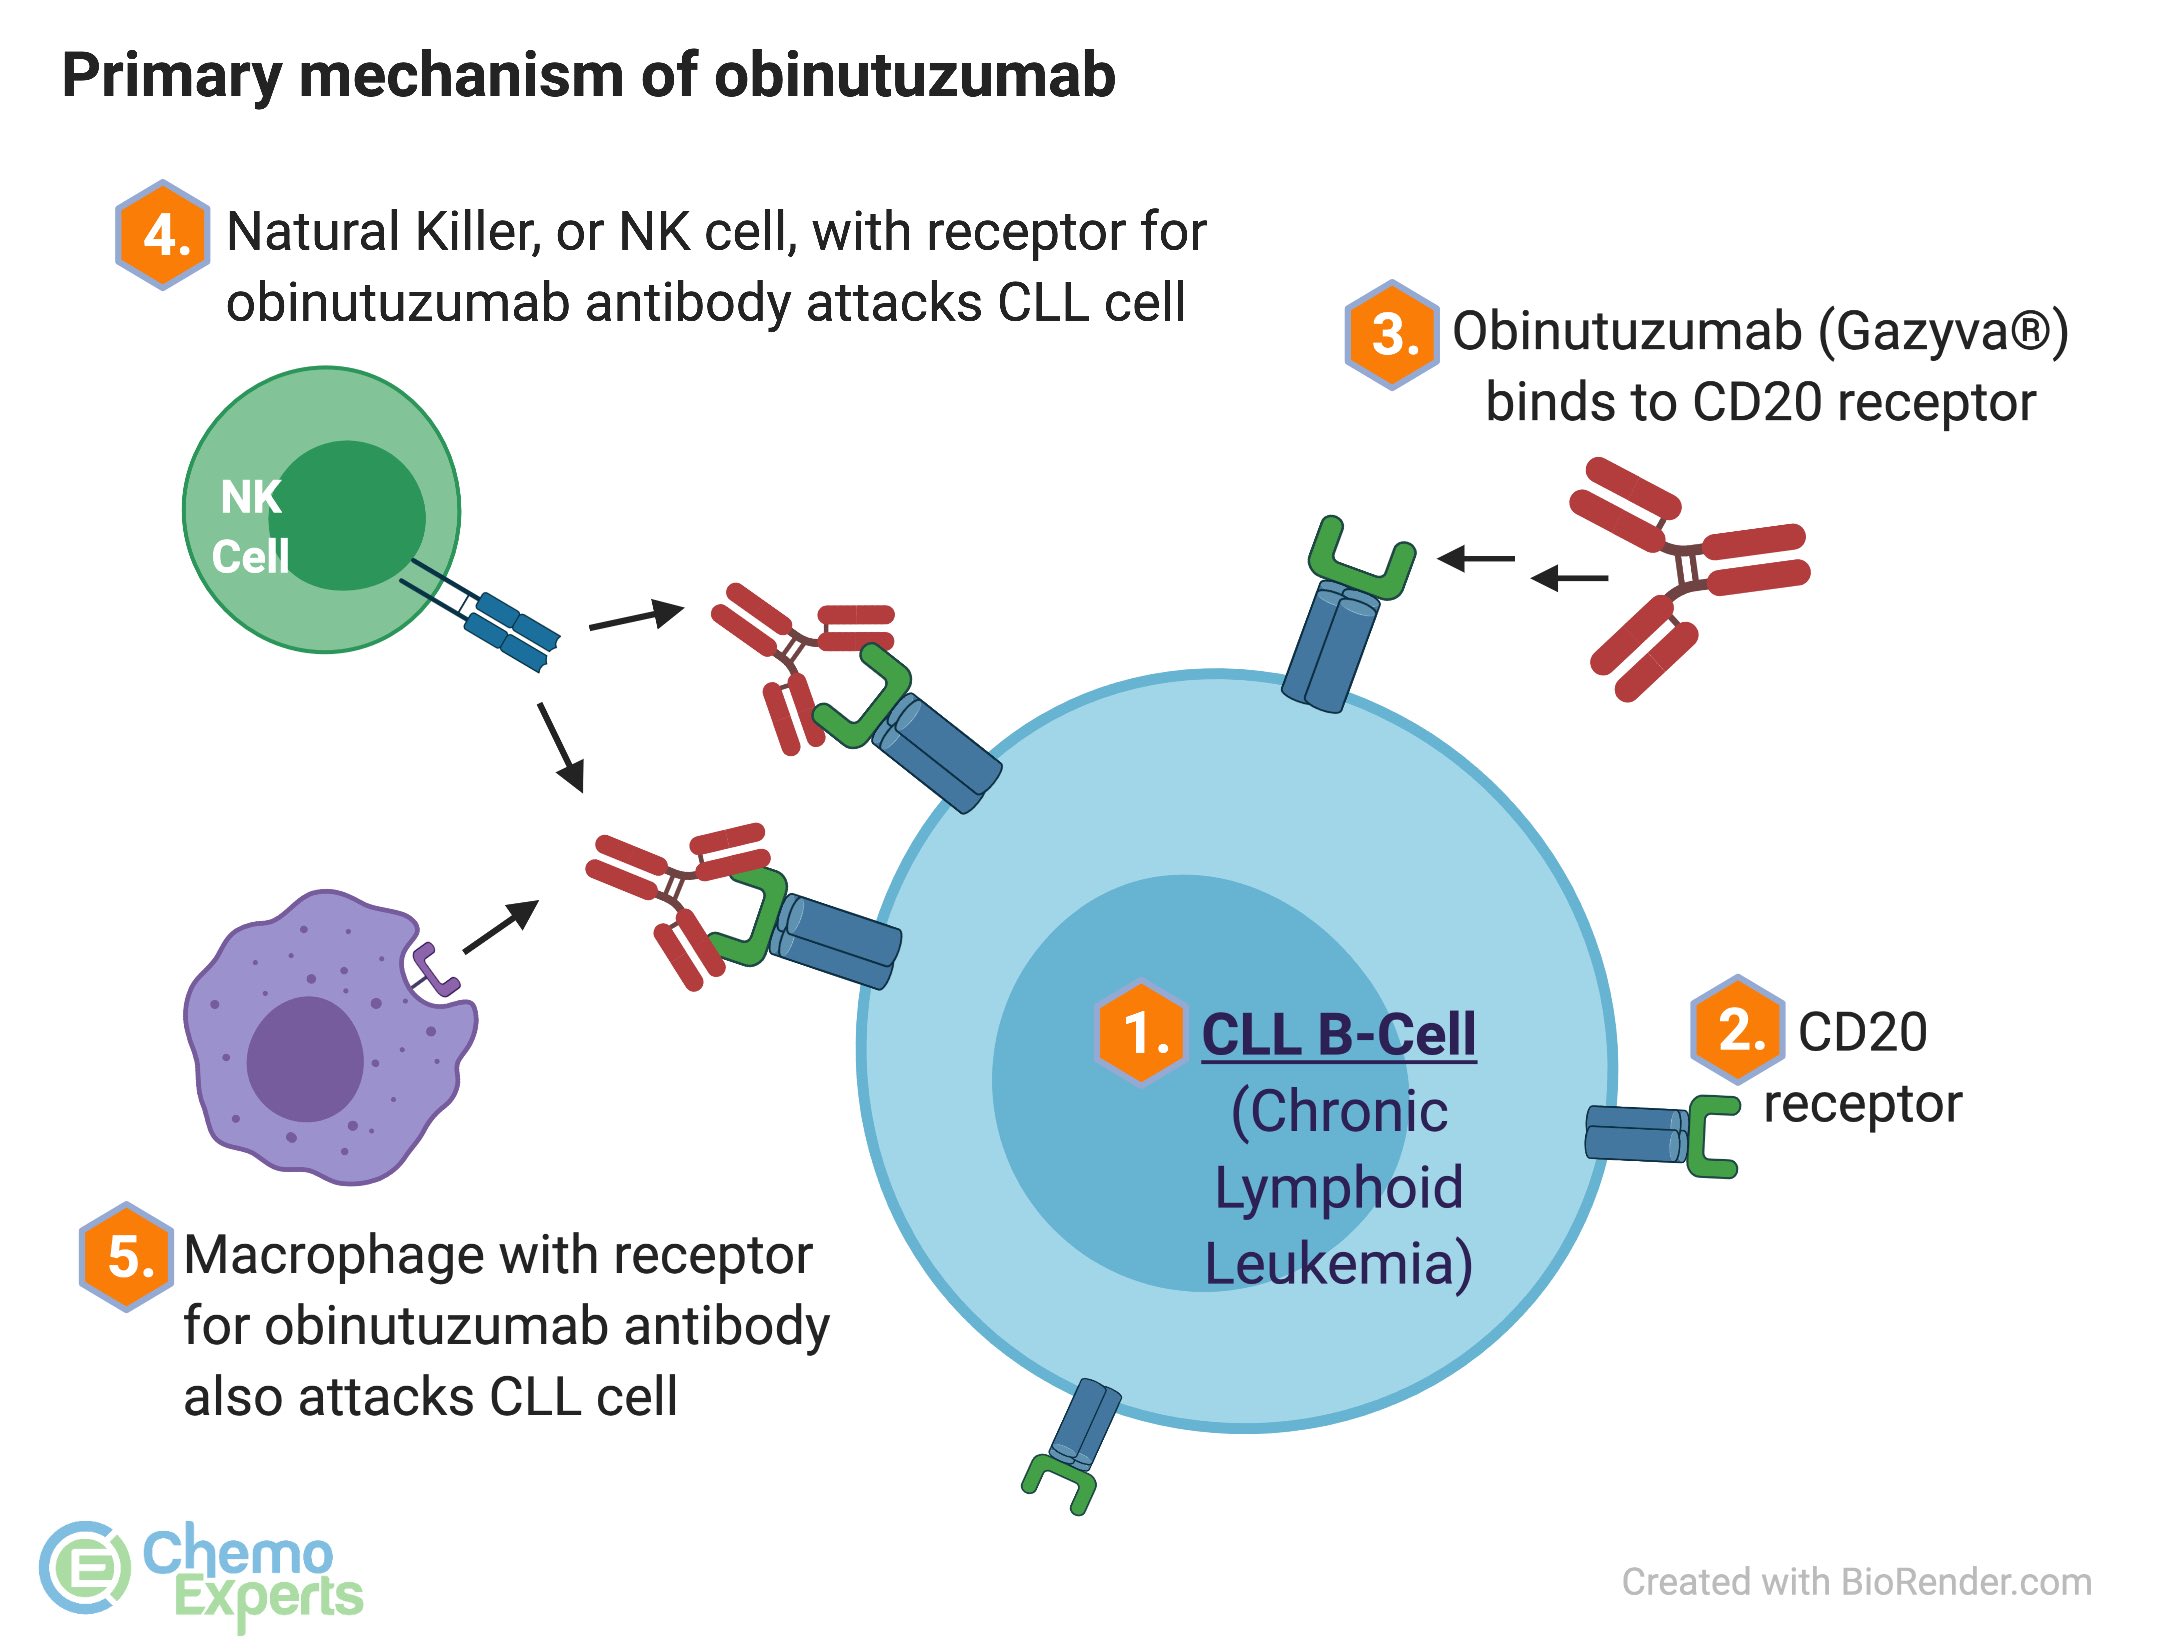 Primary-mechanism-of-action-obtinutuzumab-Gazyva-for-CLL-direct-cell-death-and-complement-mediated-pathways-image.jpg